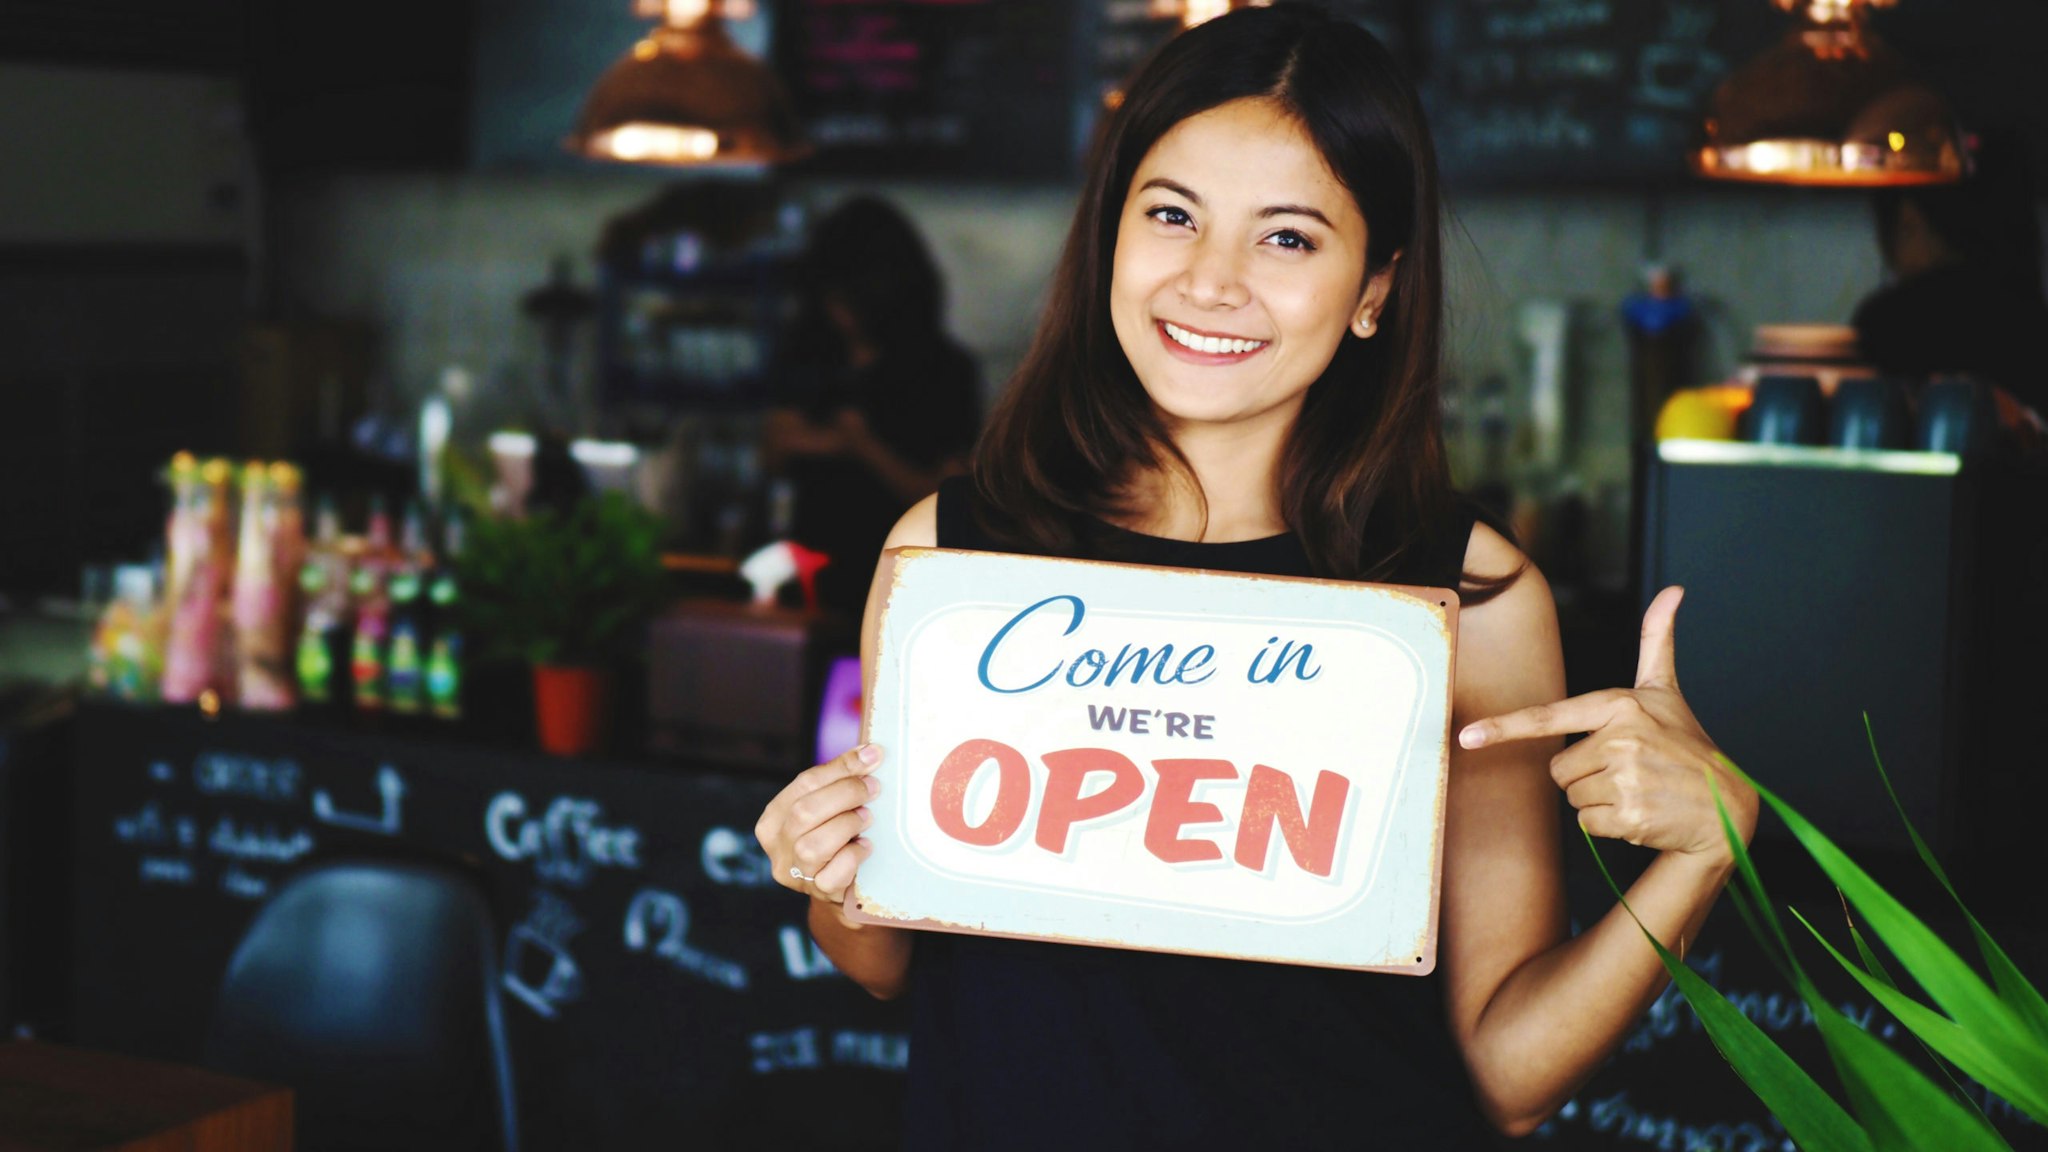 Portrait Of Smiling Young Woman Holding Open Sign While Standing In Cafe - stock photo